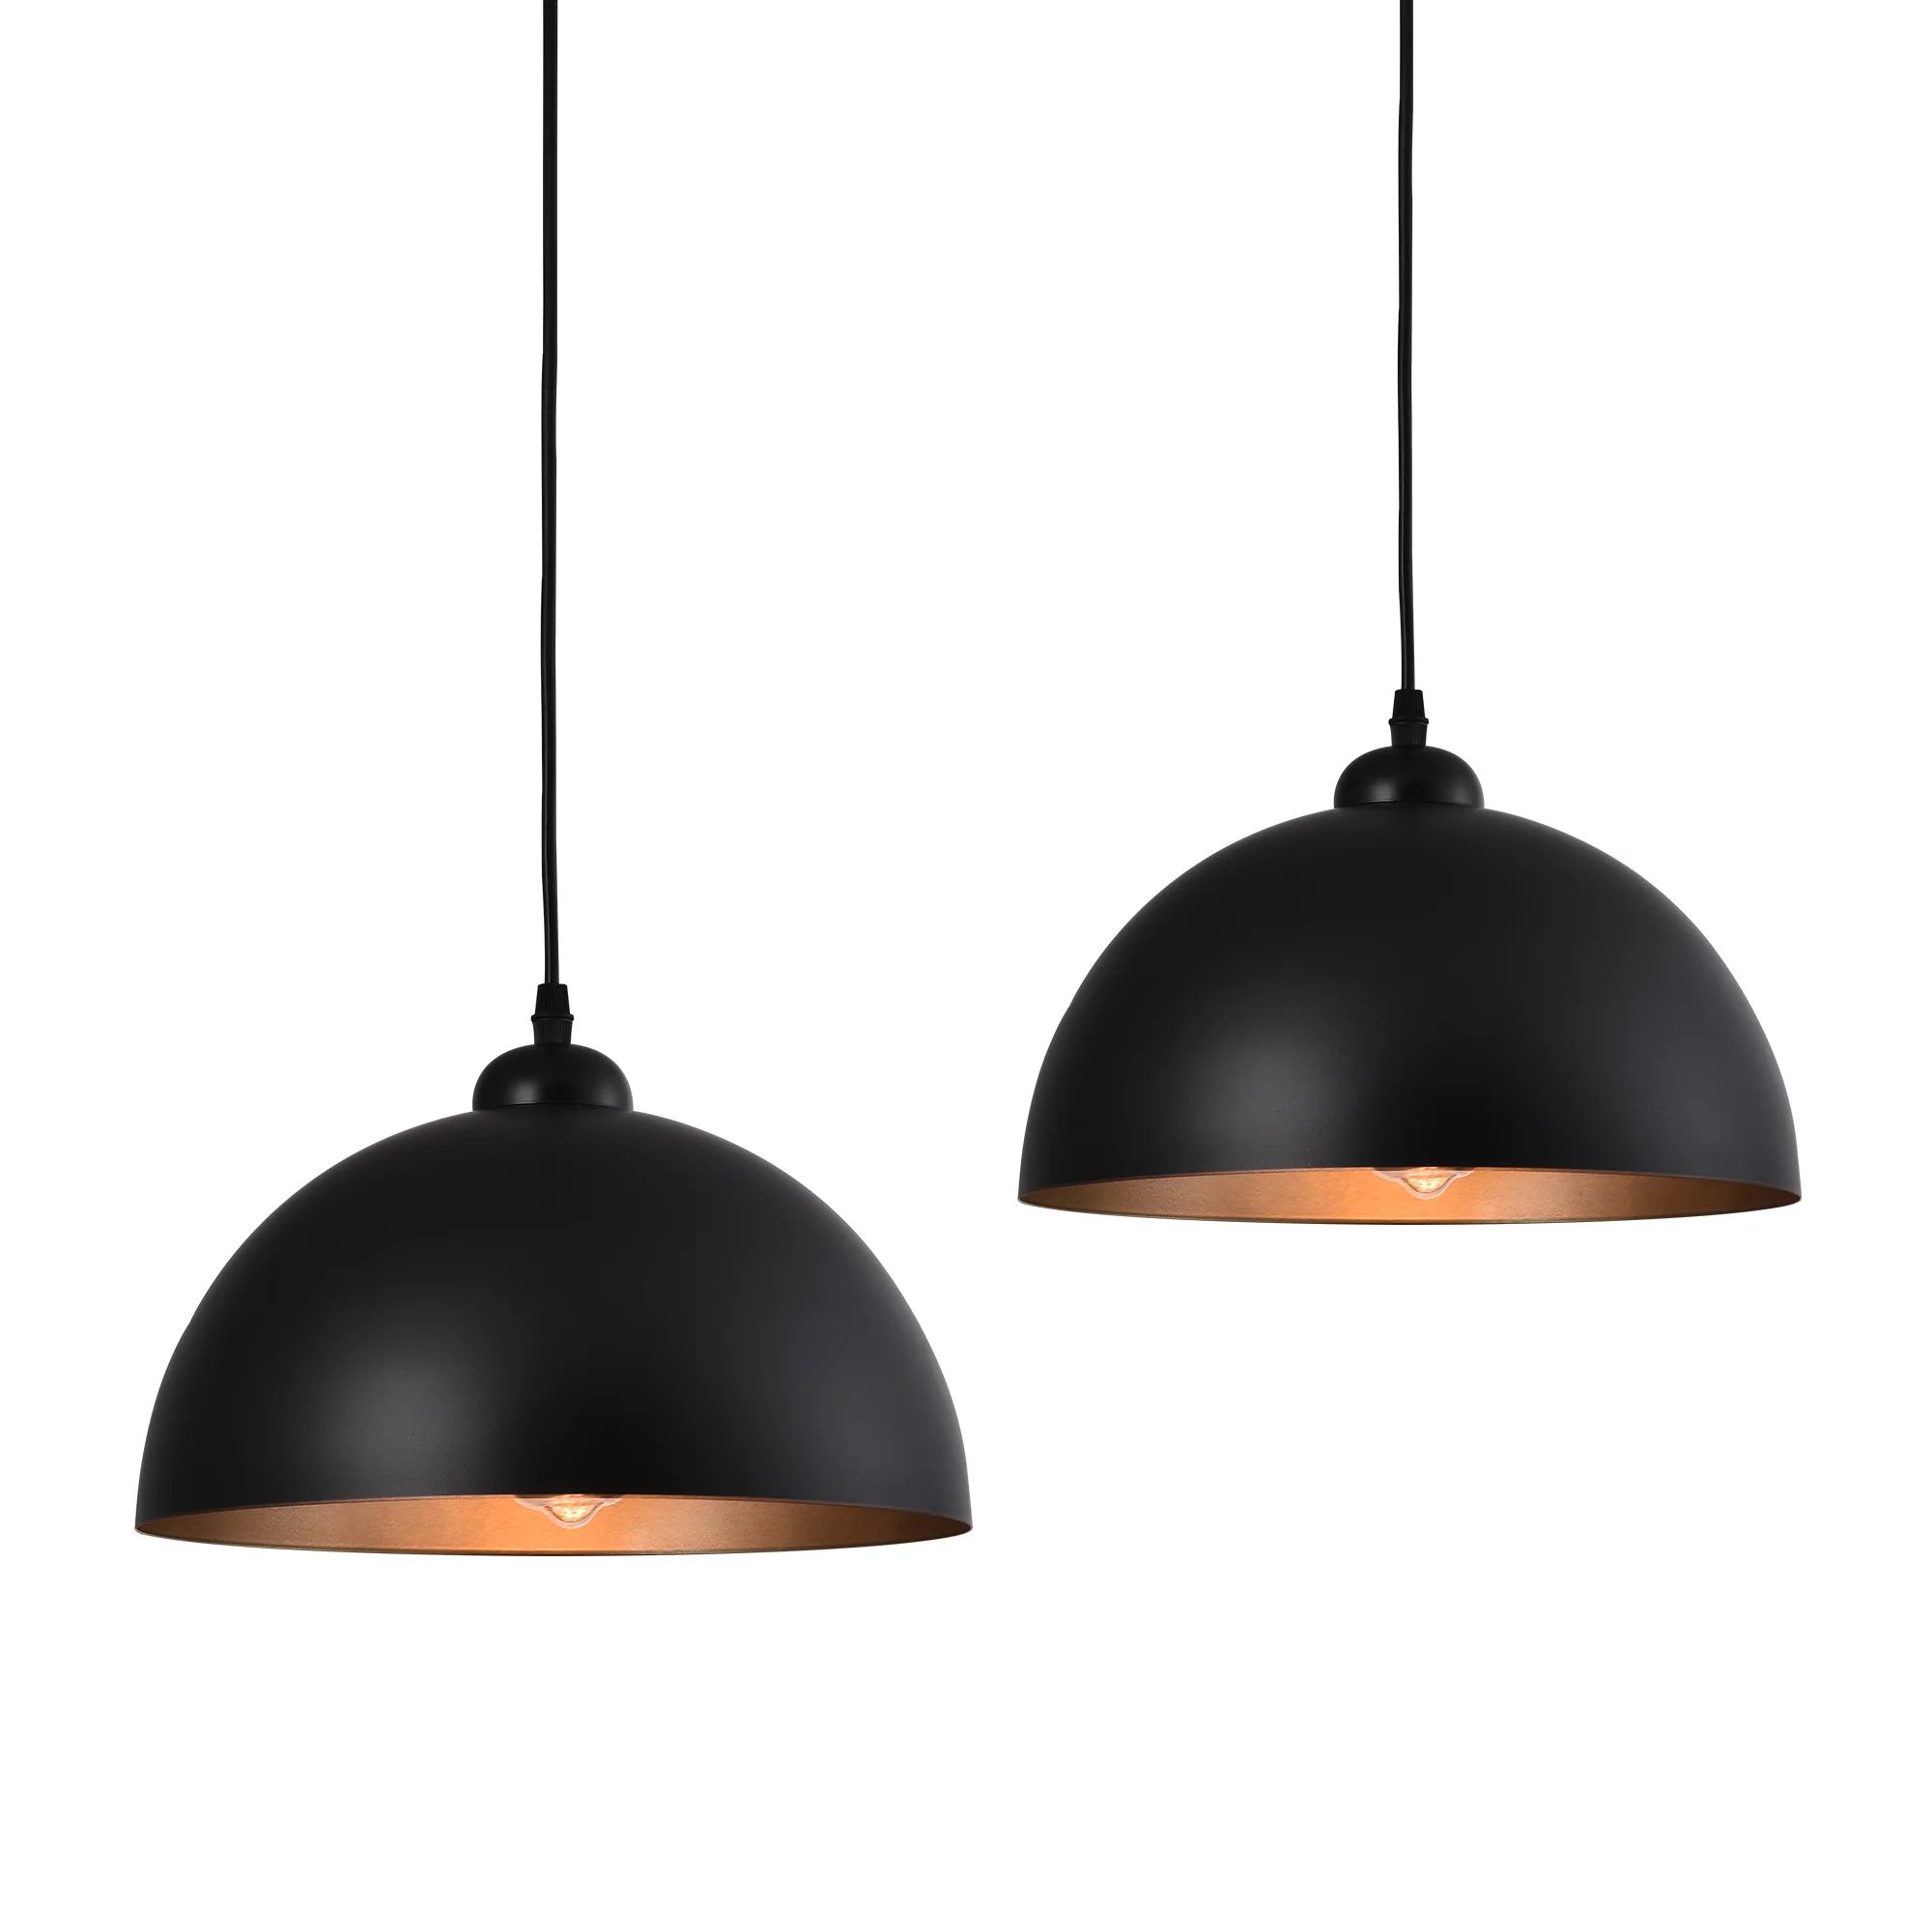 Dileo Industrial Pendant Light 2 Pack Vintage Hanging Lighting Fixuture With Black Metal Dome Lam... | Wayfair Professional